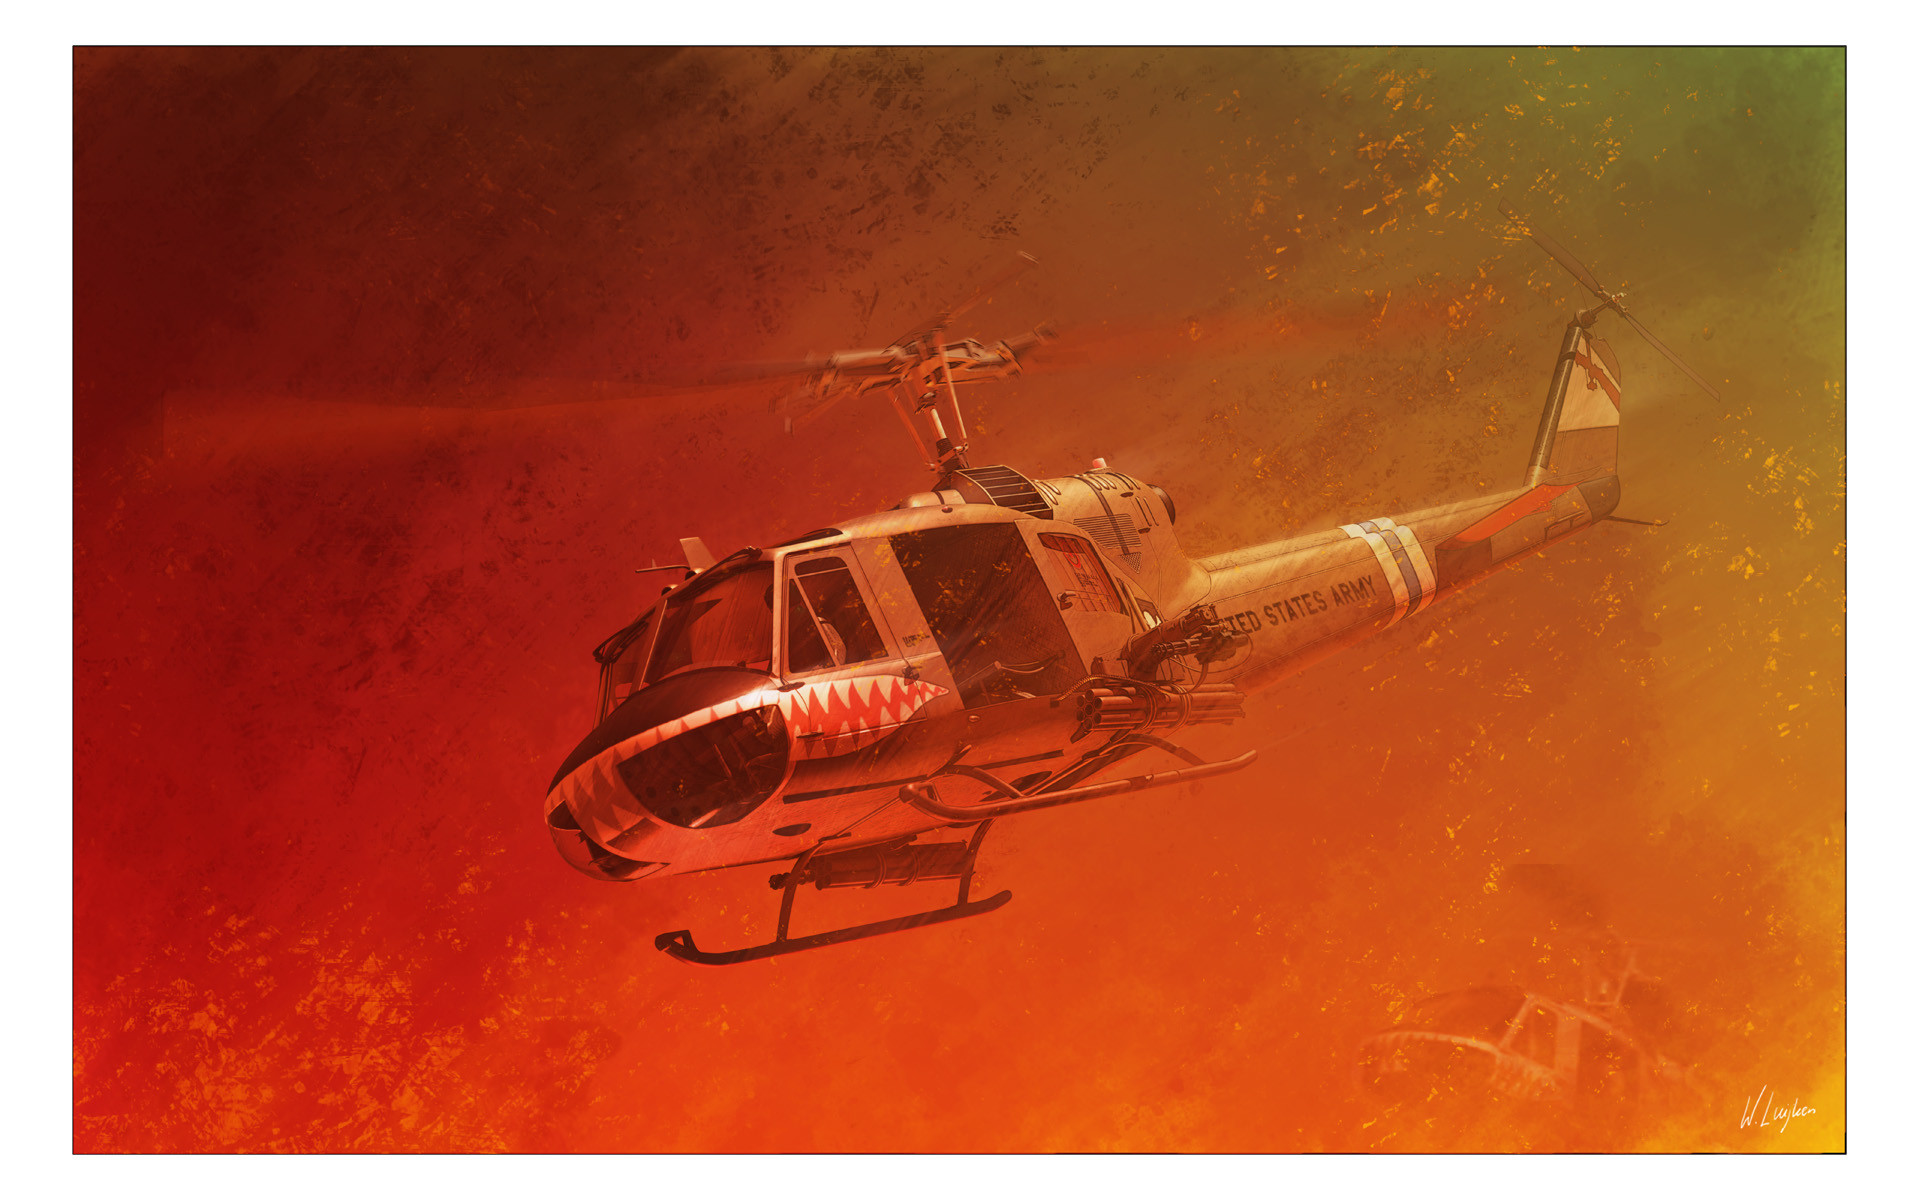 1920x1200 The image depicts a huey gunship coming in to give fire support for their  buddies.